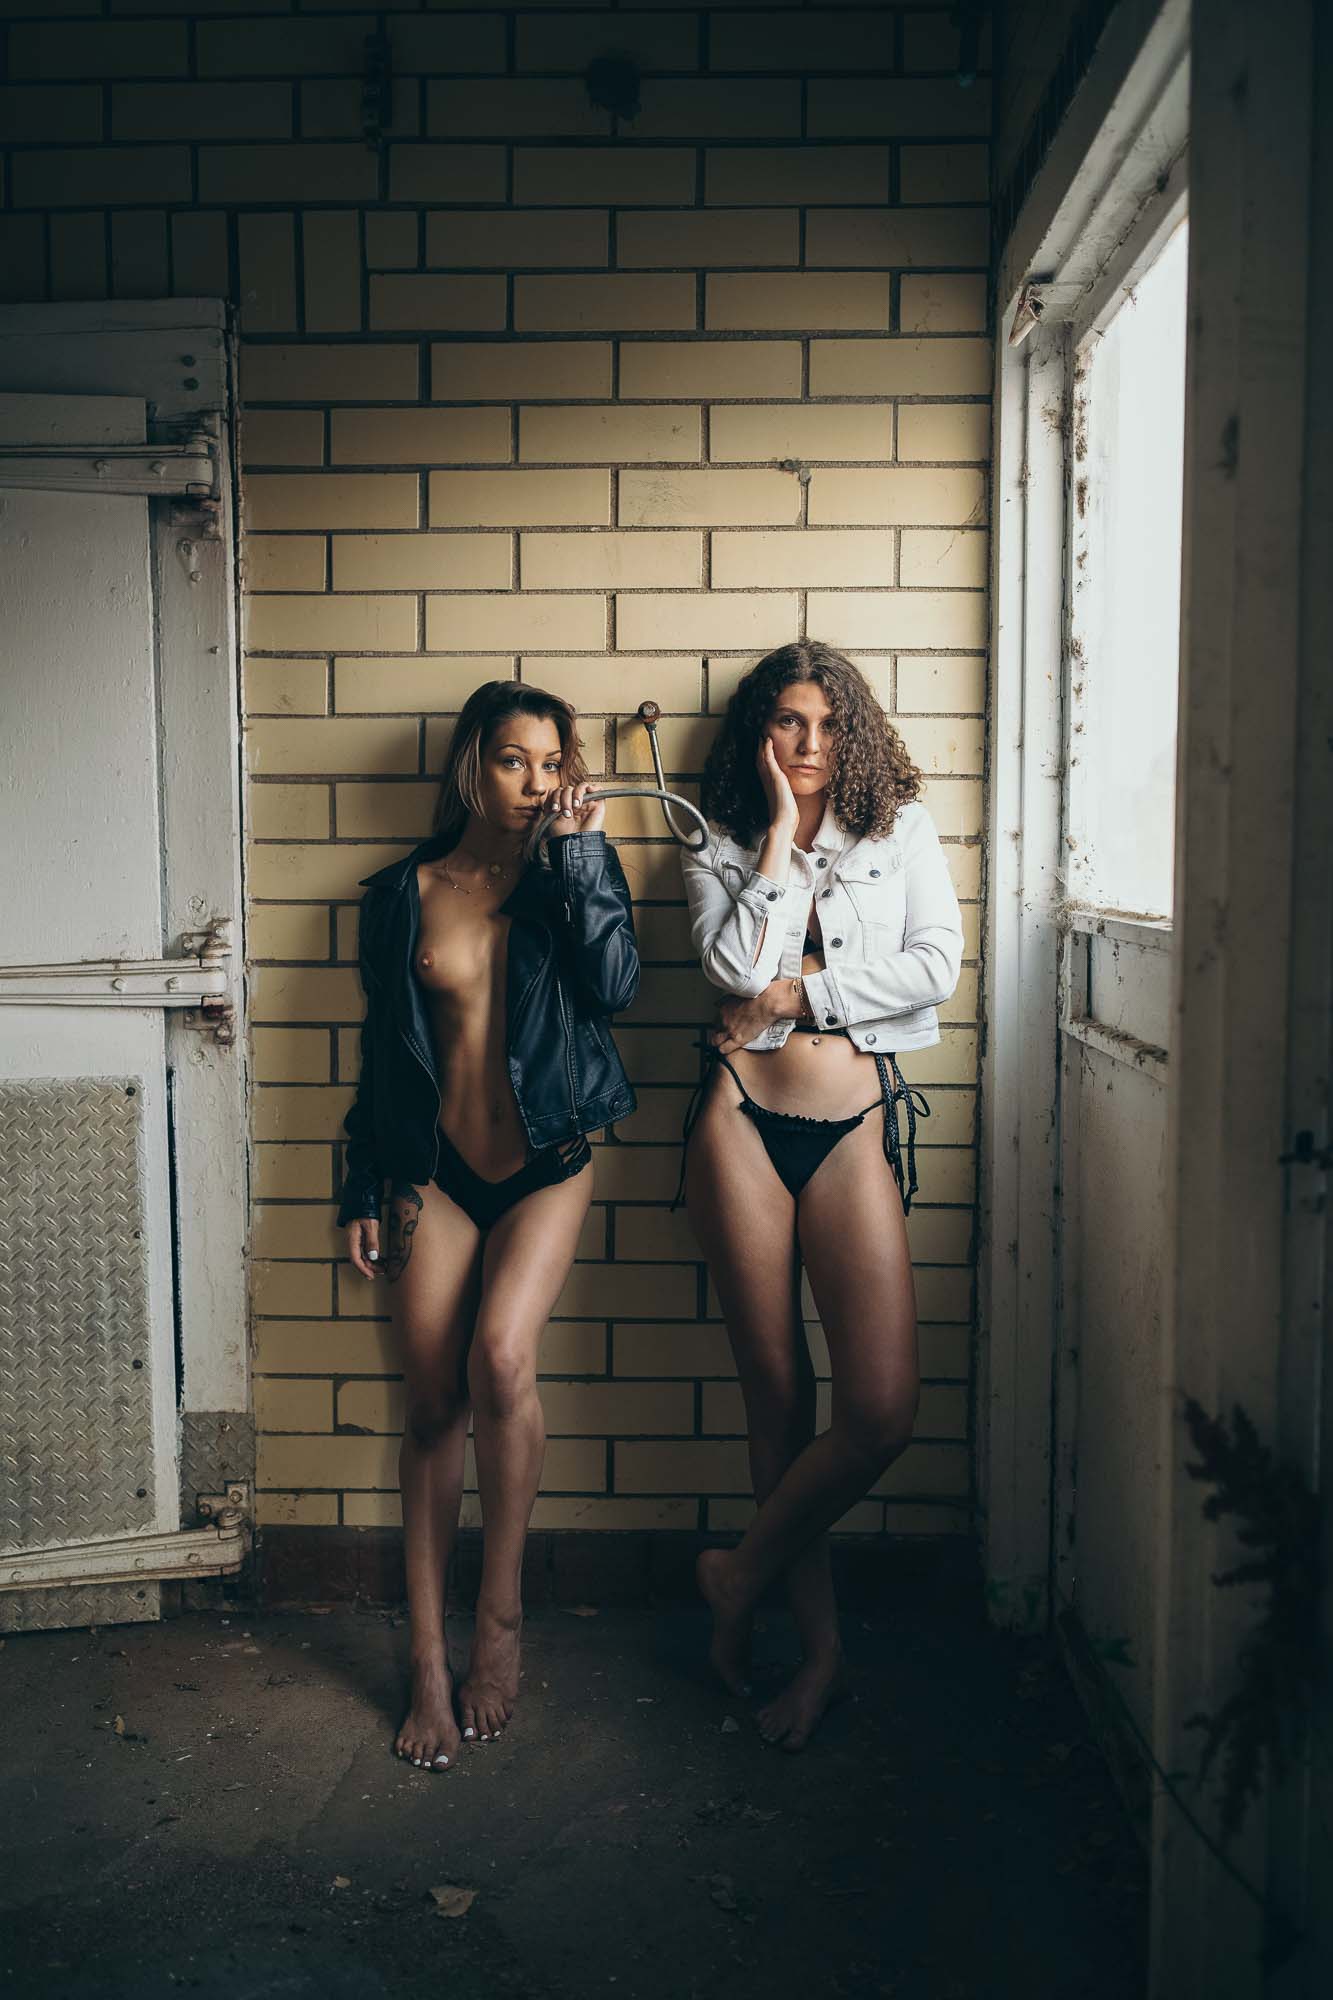 Models @space.junkiee and @lalavishlux in Lingerie in abandoned building | Nude | Boudoir Photography | Fashion Photography |